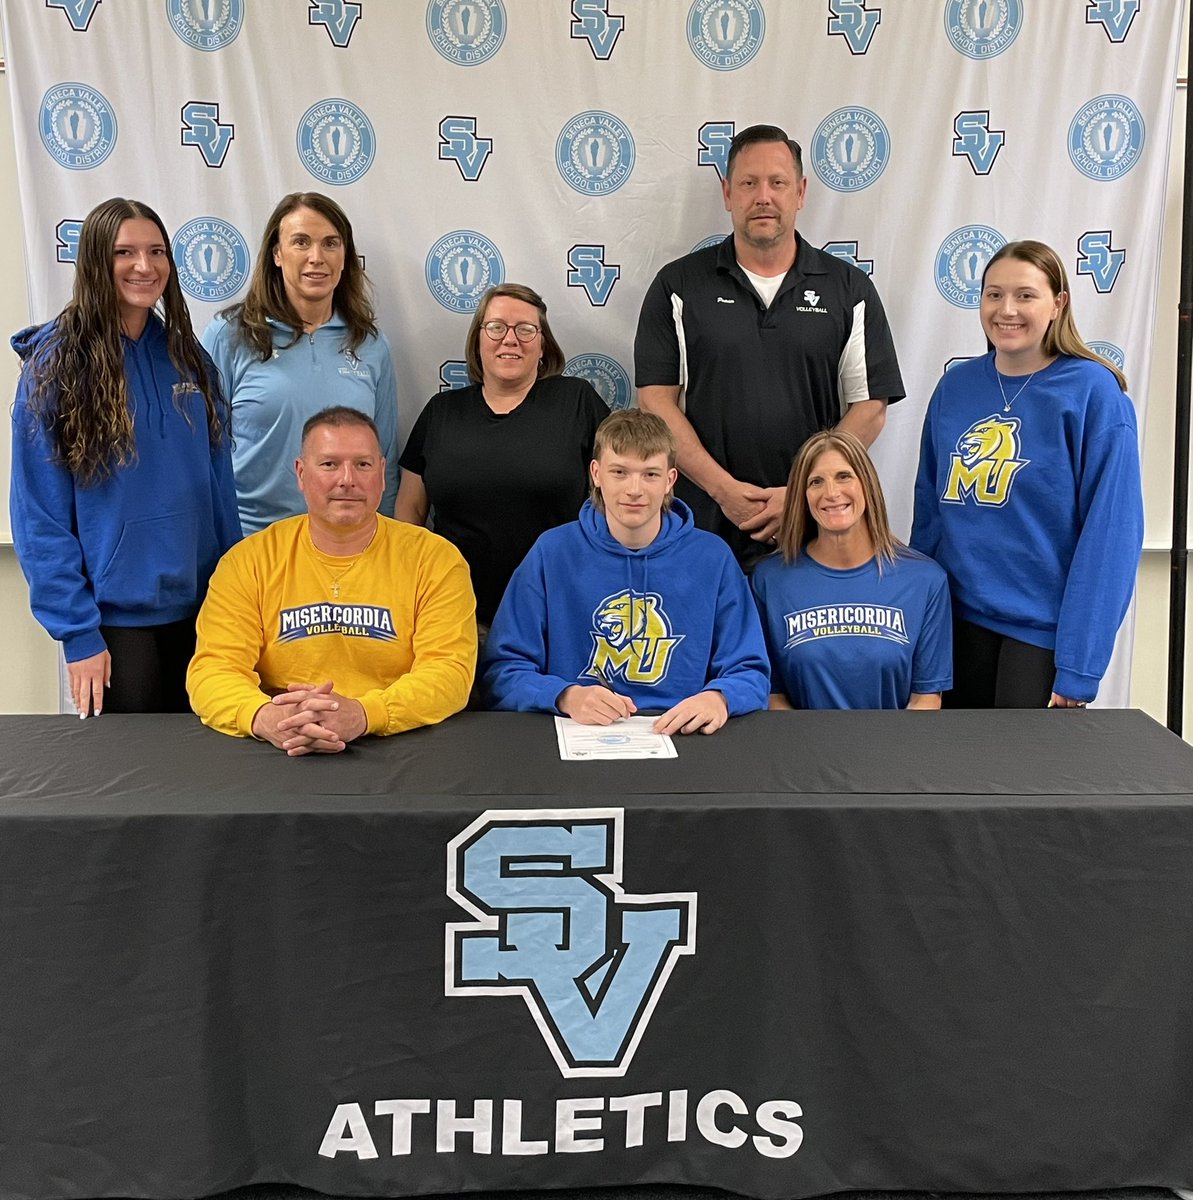 Peter Breski @peterbreski_888 makes his commitment official to attend Misericordia University @MisericordiaU to study Business and compete as a setter/right side hitter on the men’s volleyball team. Congratulations Peter! @MUCougars #SV24